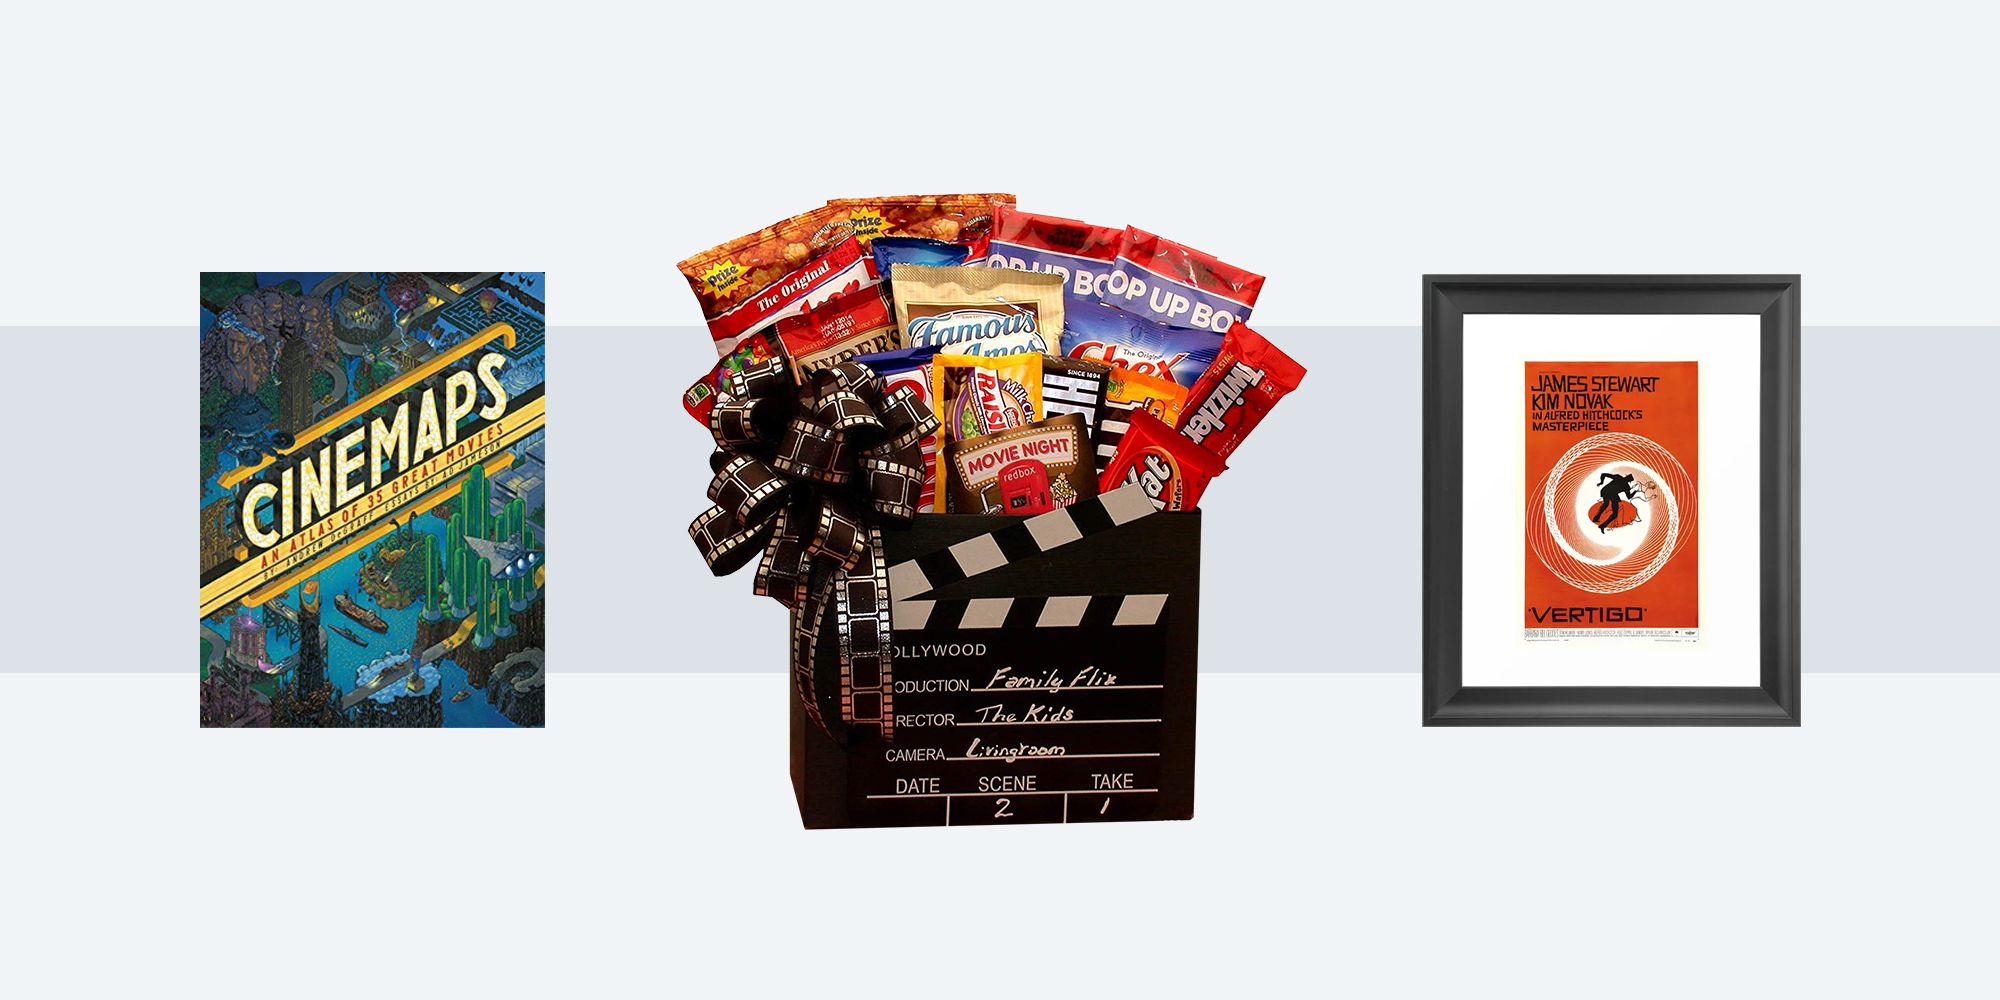 Holiday Gift Guide 2022: Classic Films & Art House Cinema